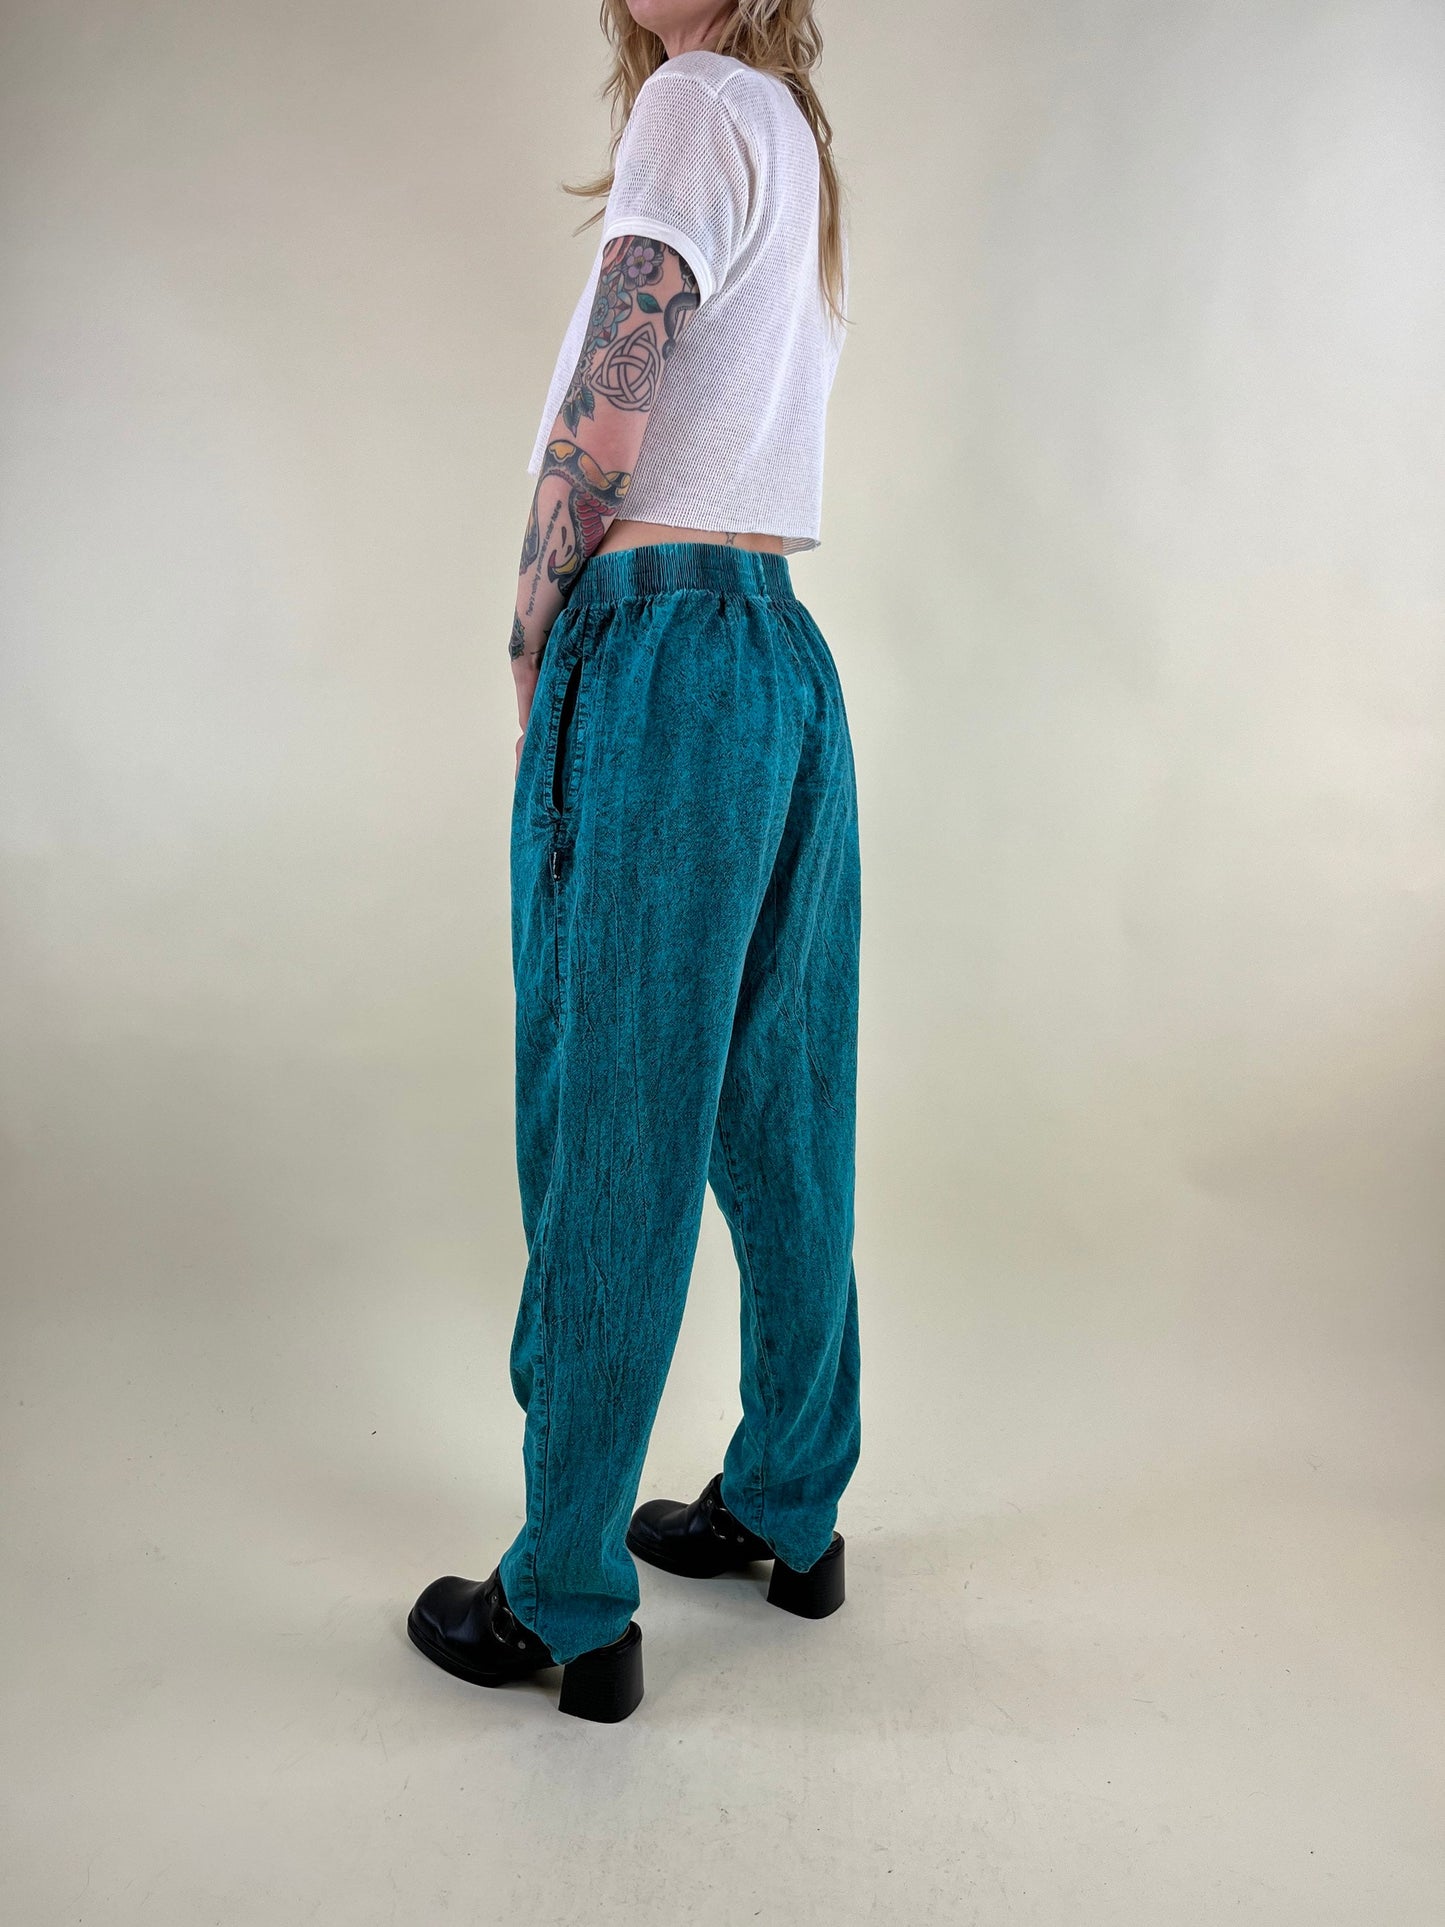 90s Green Ezze Wear Cotton Pants / Made in Canada / Small